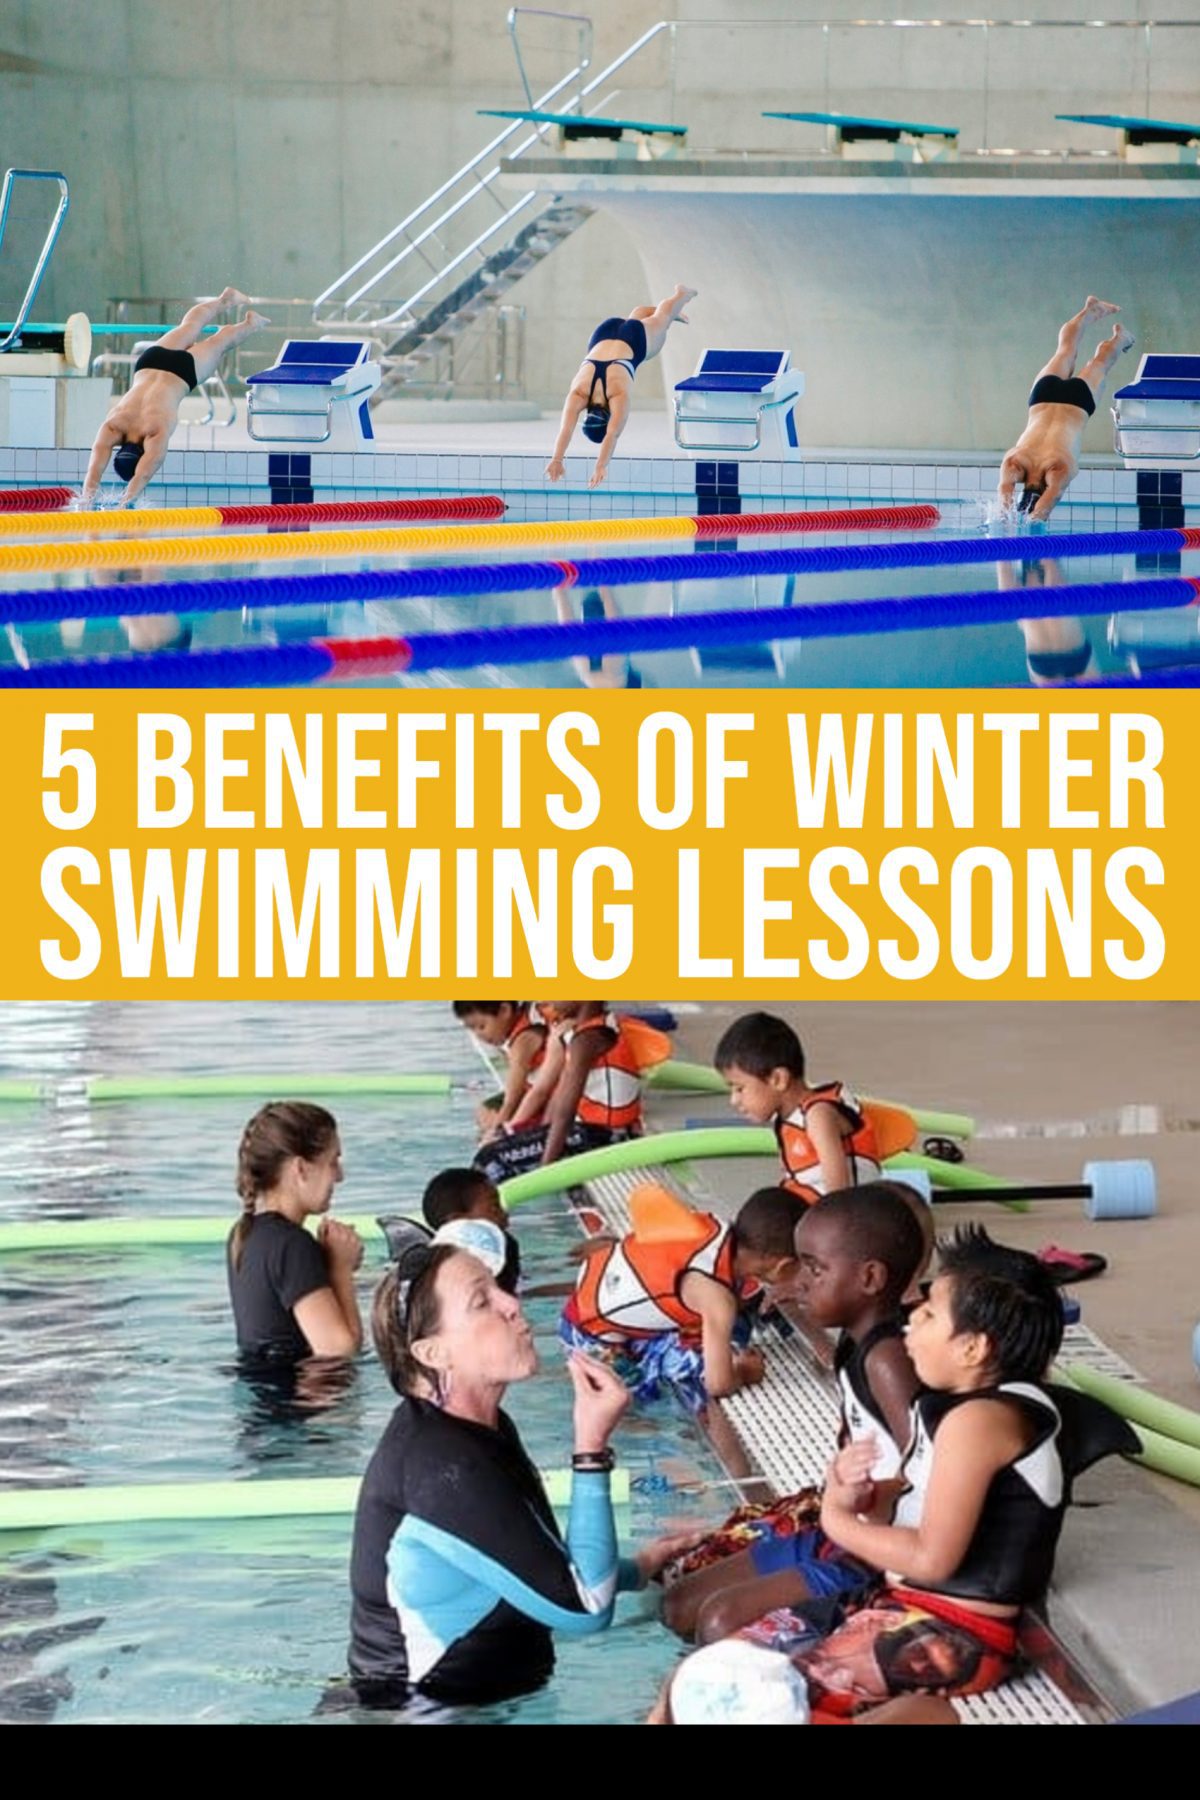 5 Benefits Of Winter Swimming Lessons